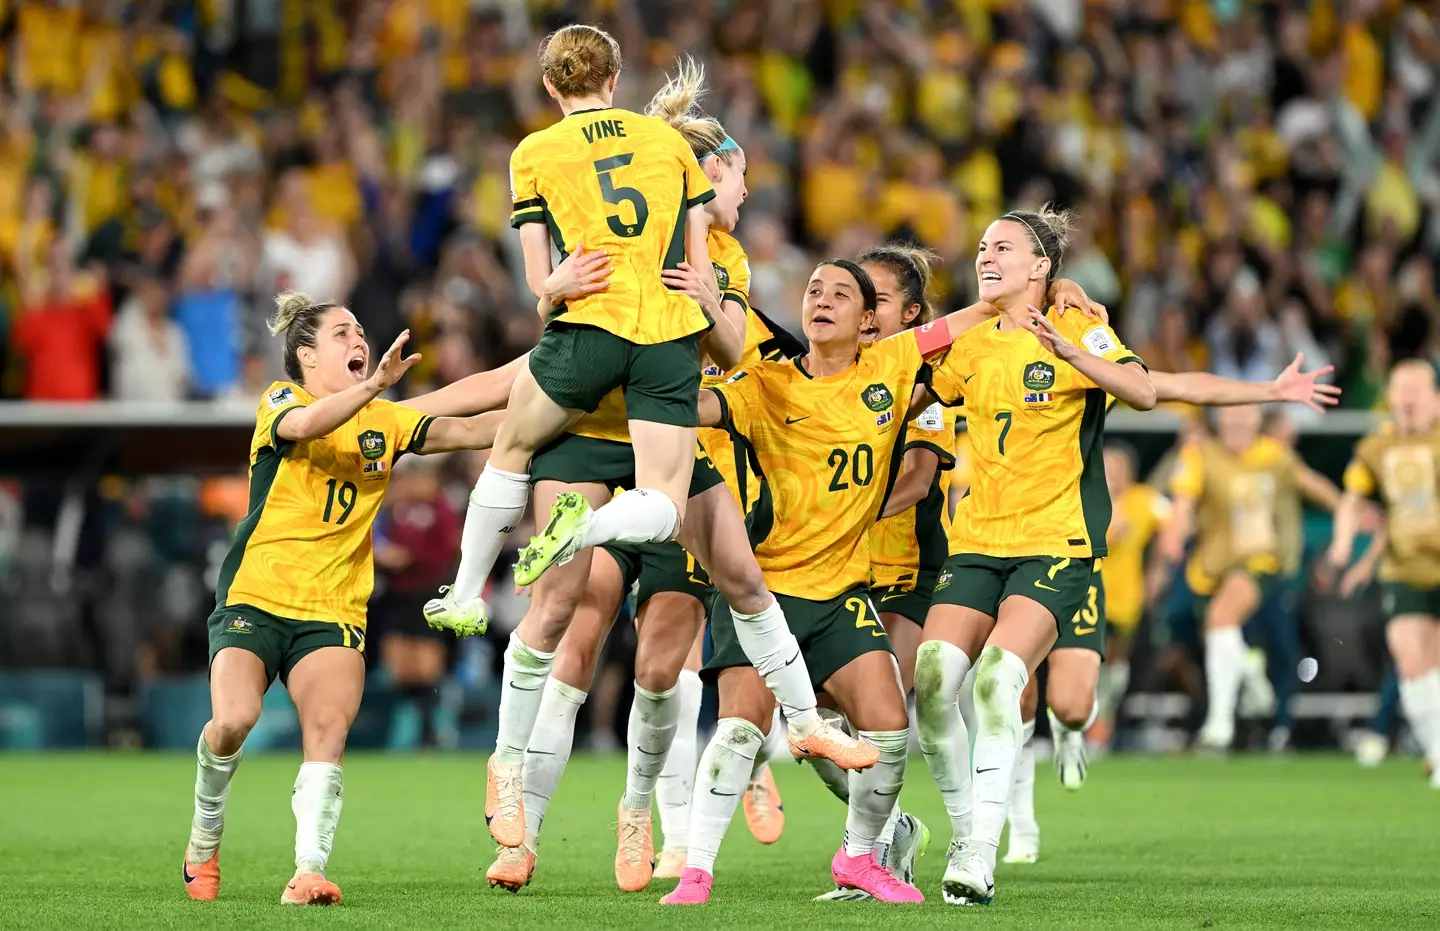 Cortnee Vine scored the winning penalty to put Australia through to the World Cup semi finals, though not everyone was watching that.